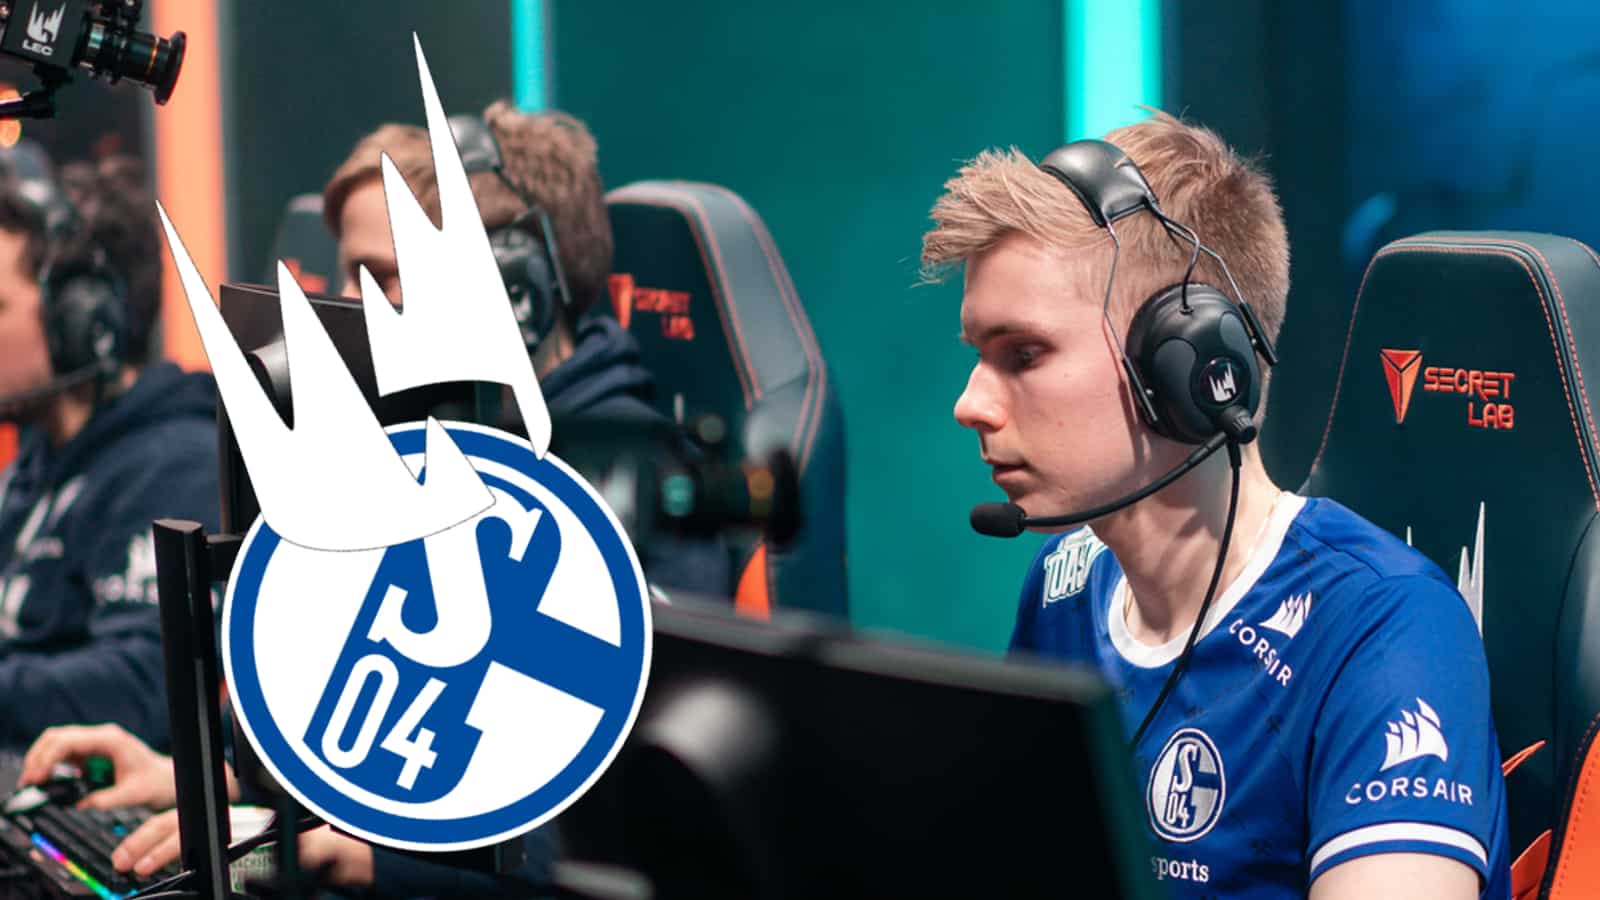 Schalke 04 bot laner Limit concentrates while playing LoL on LEC stage.